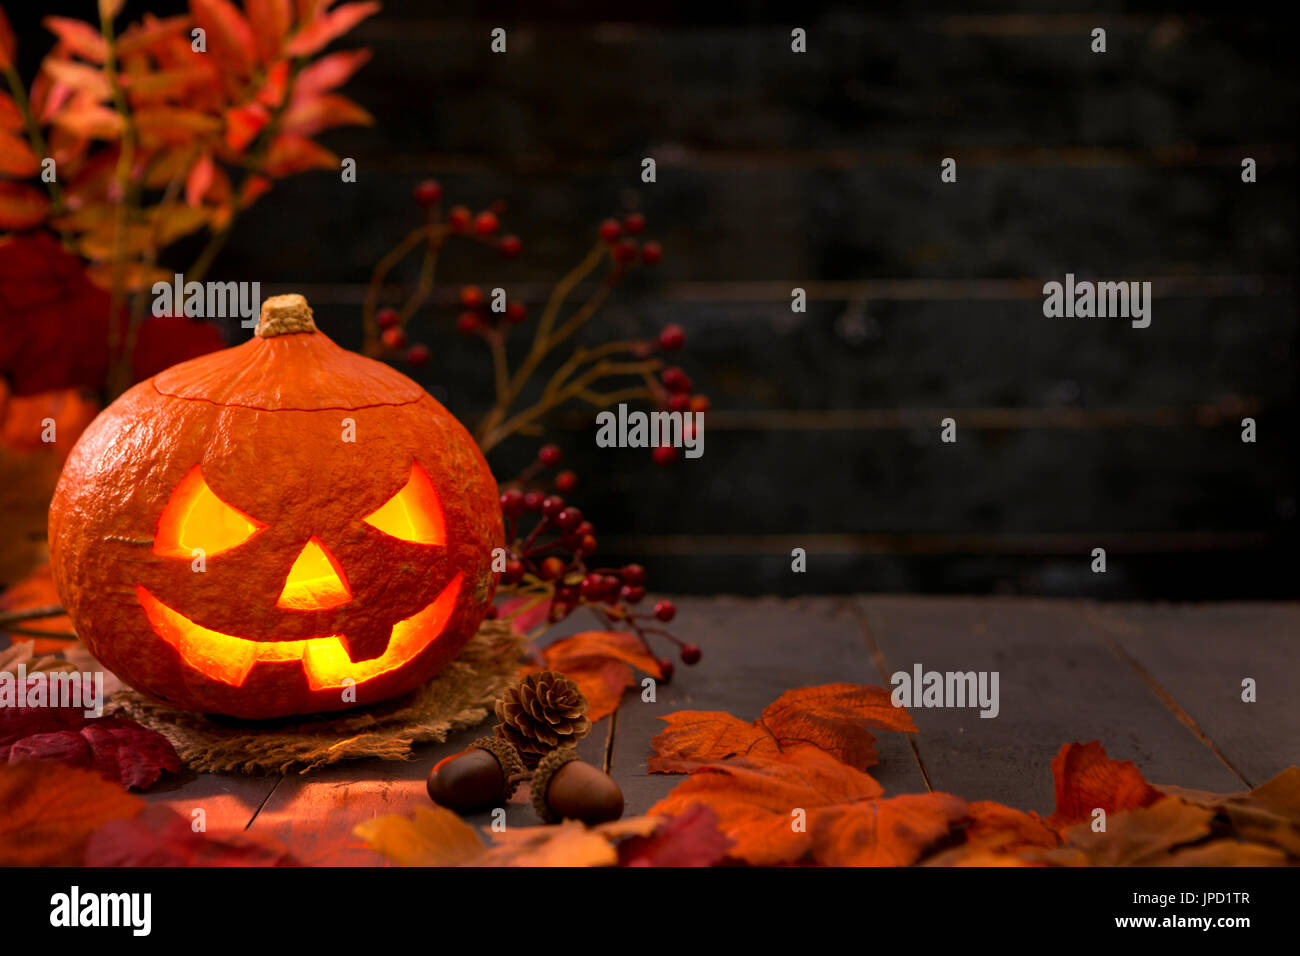 Burning Jack O'Lantern on a rustic table with autumn decorations, darkly lit. Stock Photo